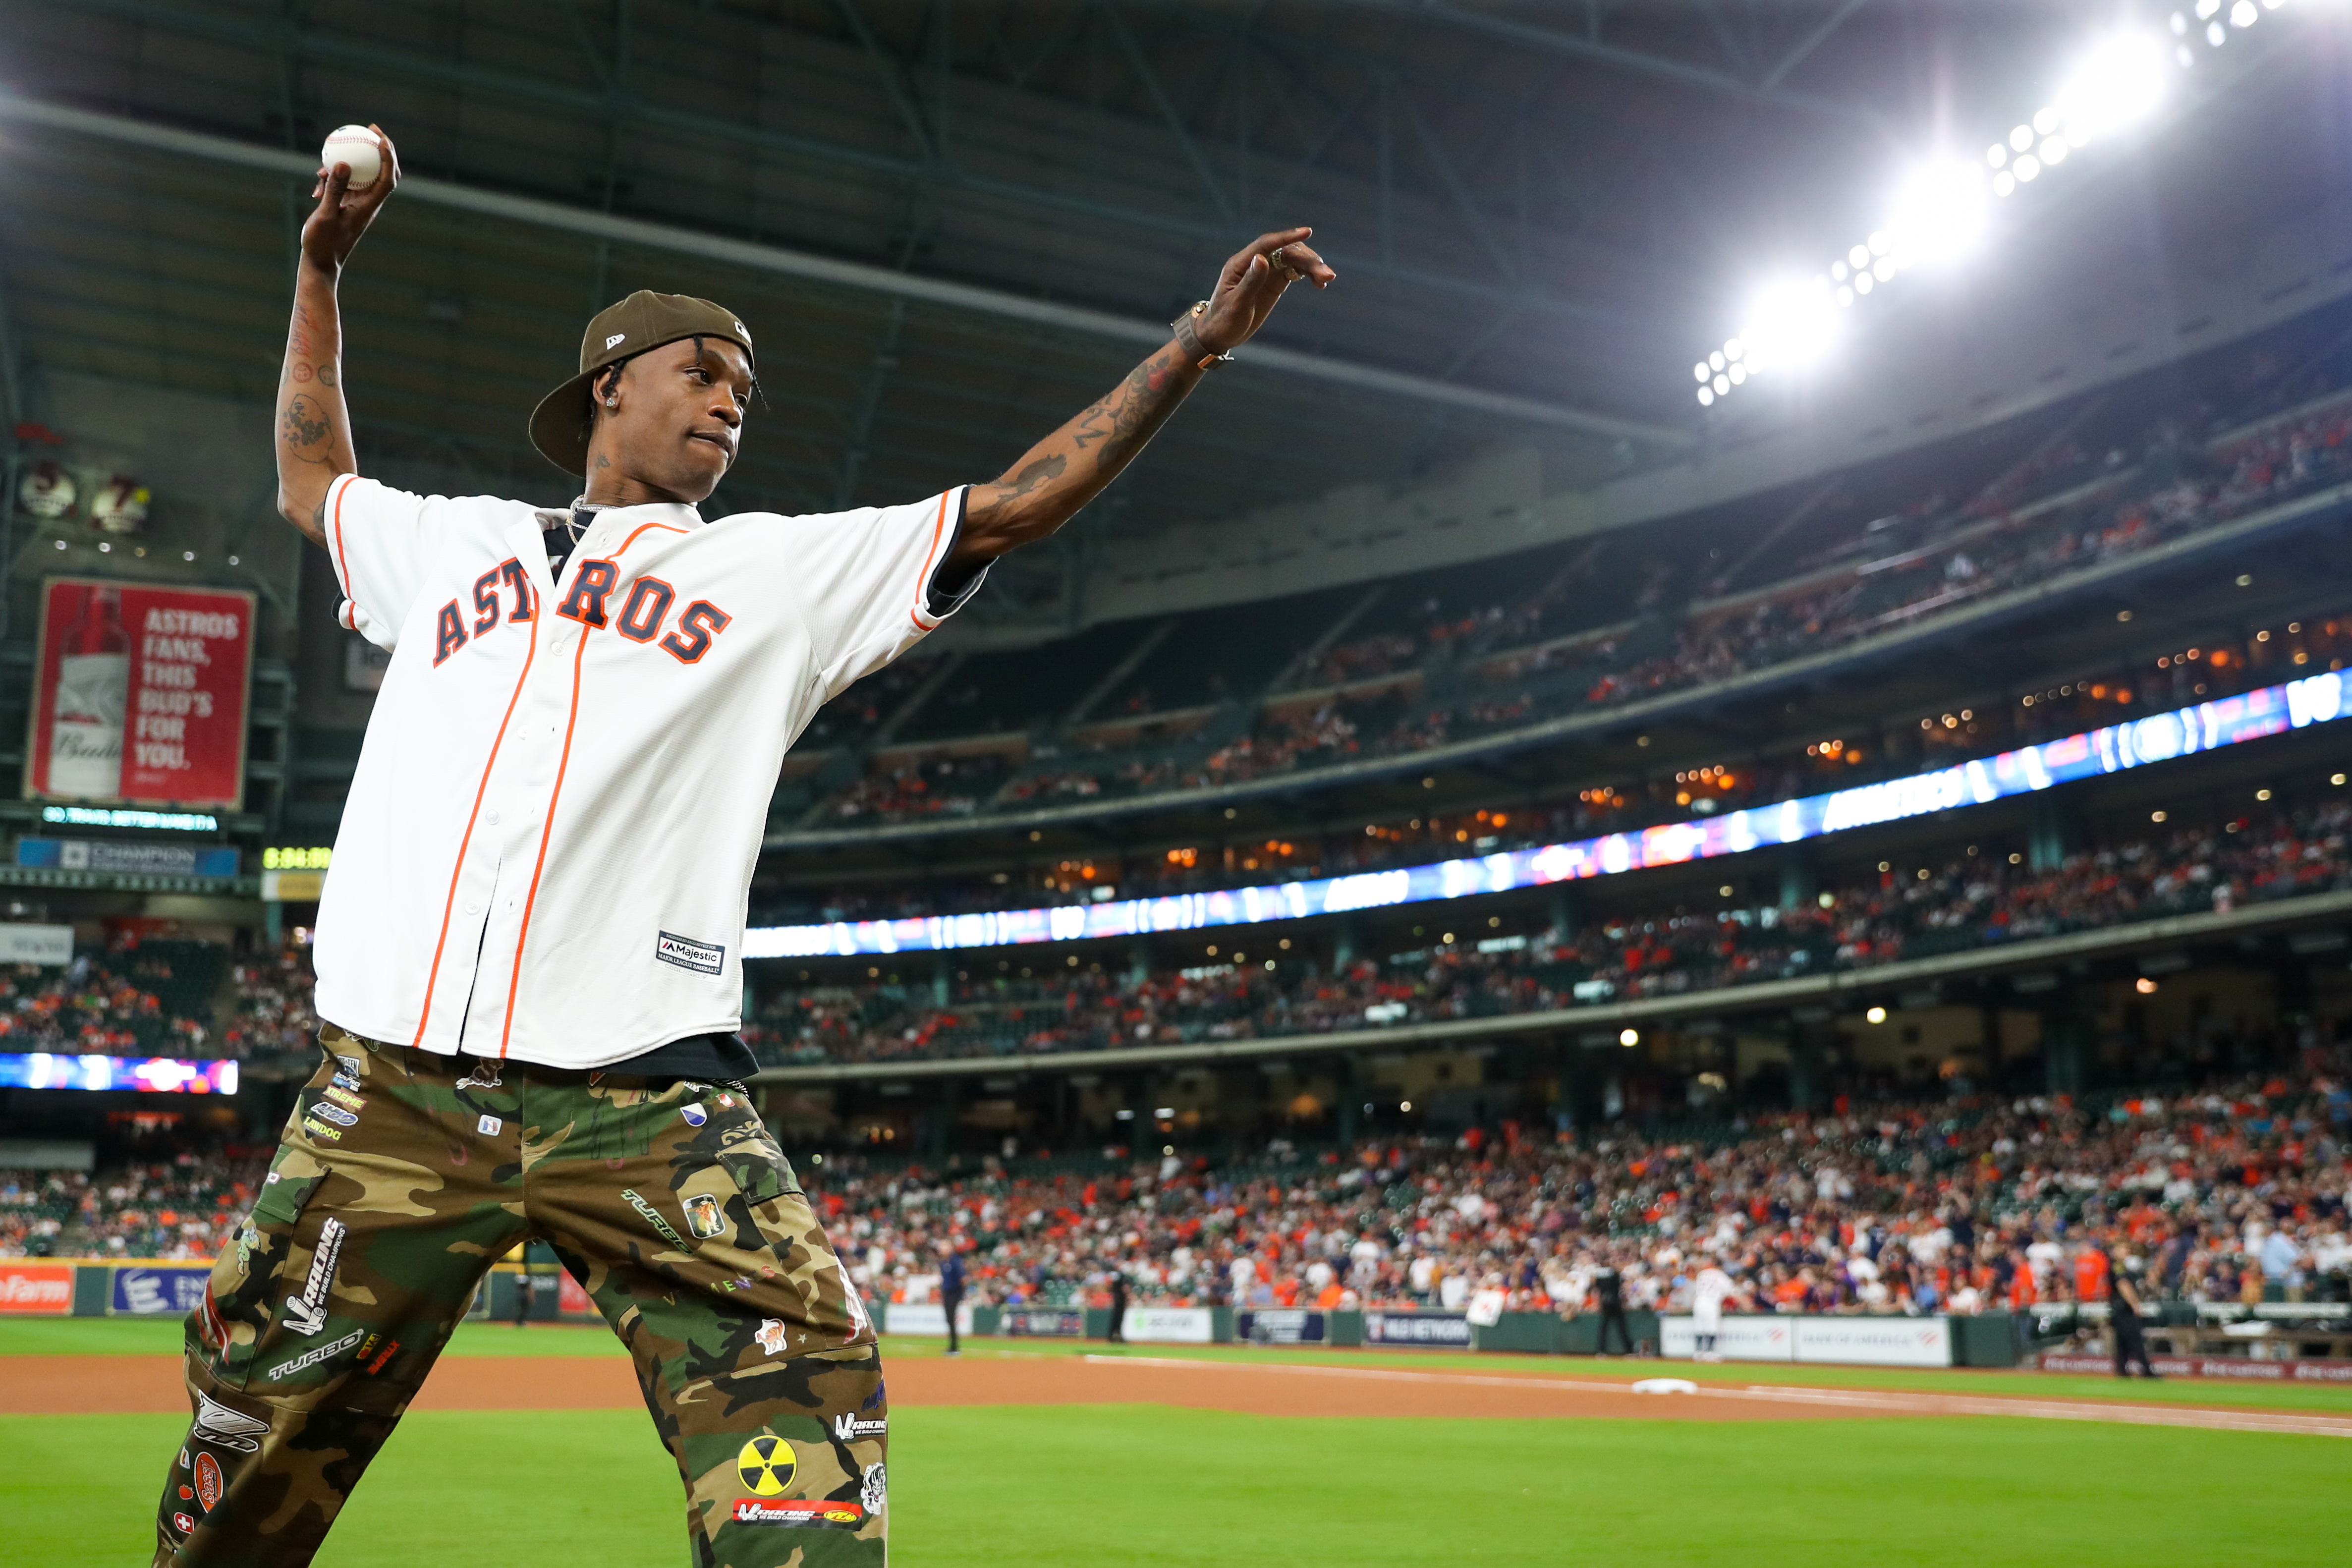 Travis Scott threw out the ceremonial first pitch at Minute Maid Park to  commemorate his Astros/New Era collaboration - The Hype Magazine